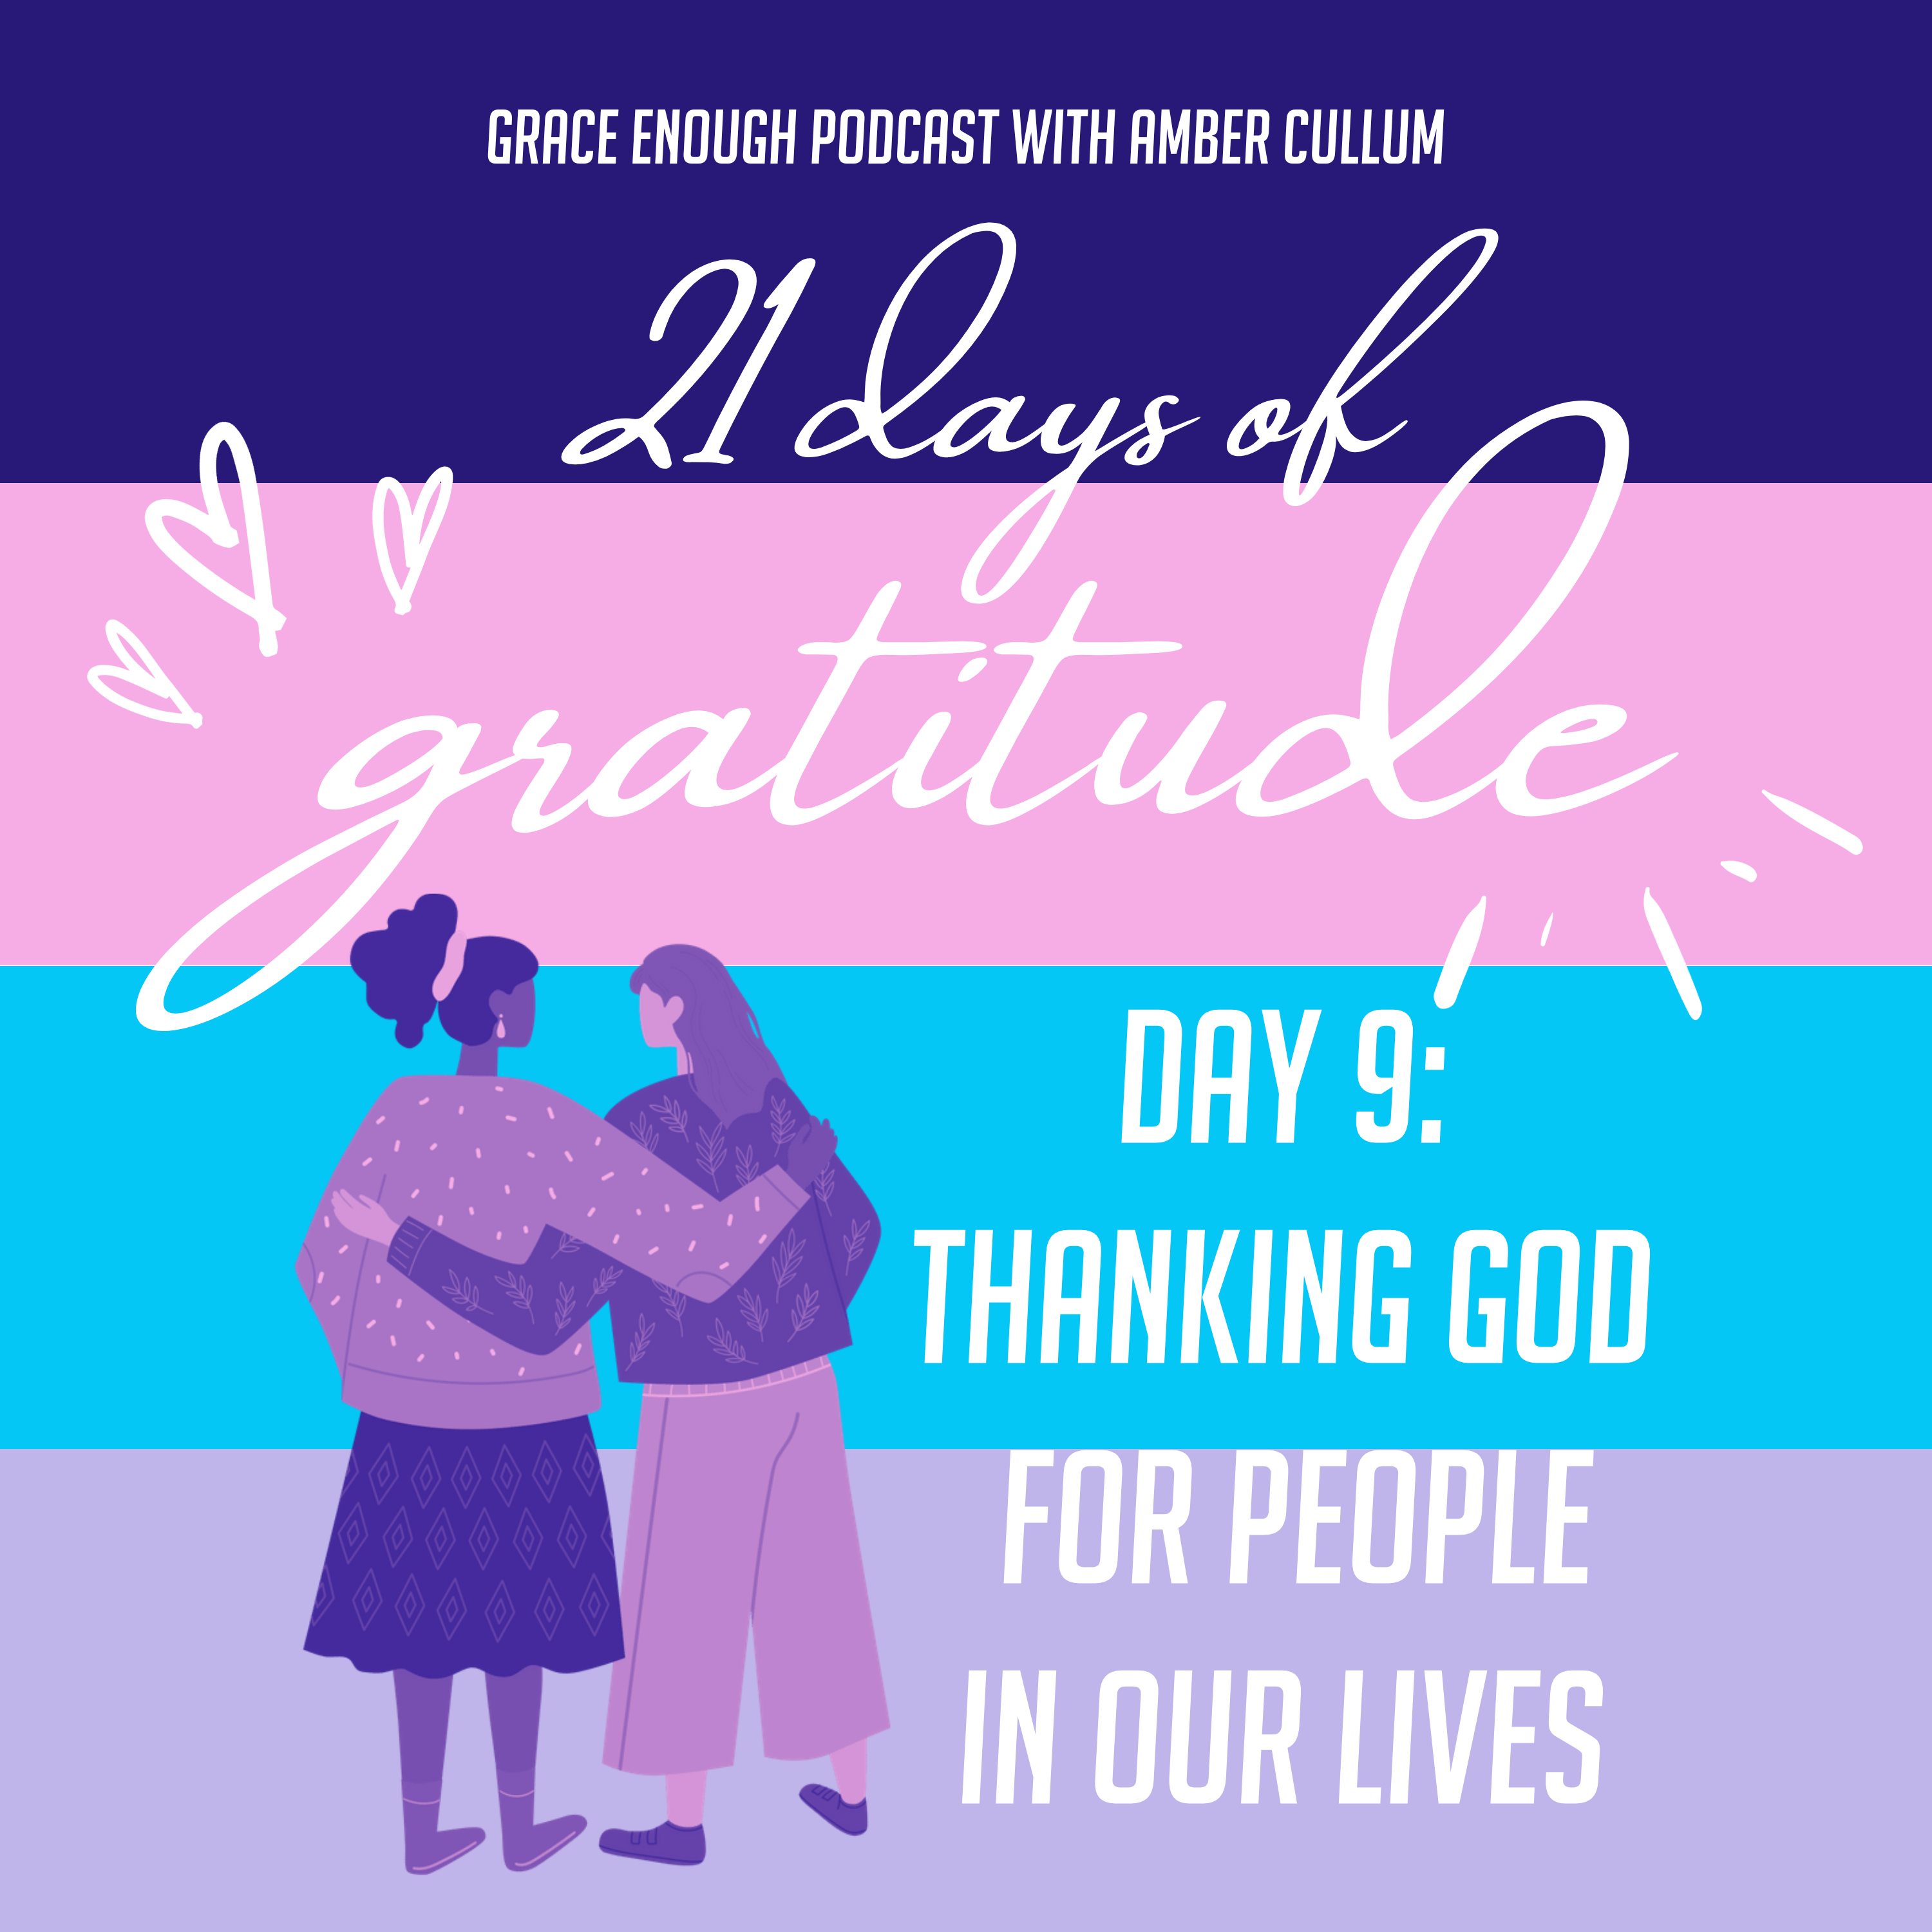 21 Days of Gratitude: Day 8, Thanking God for People in Our Lives, Day 9